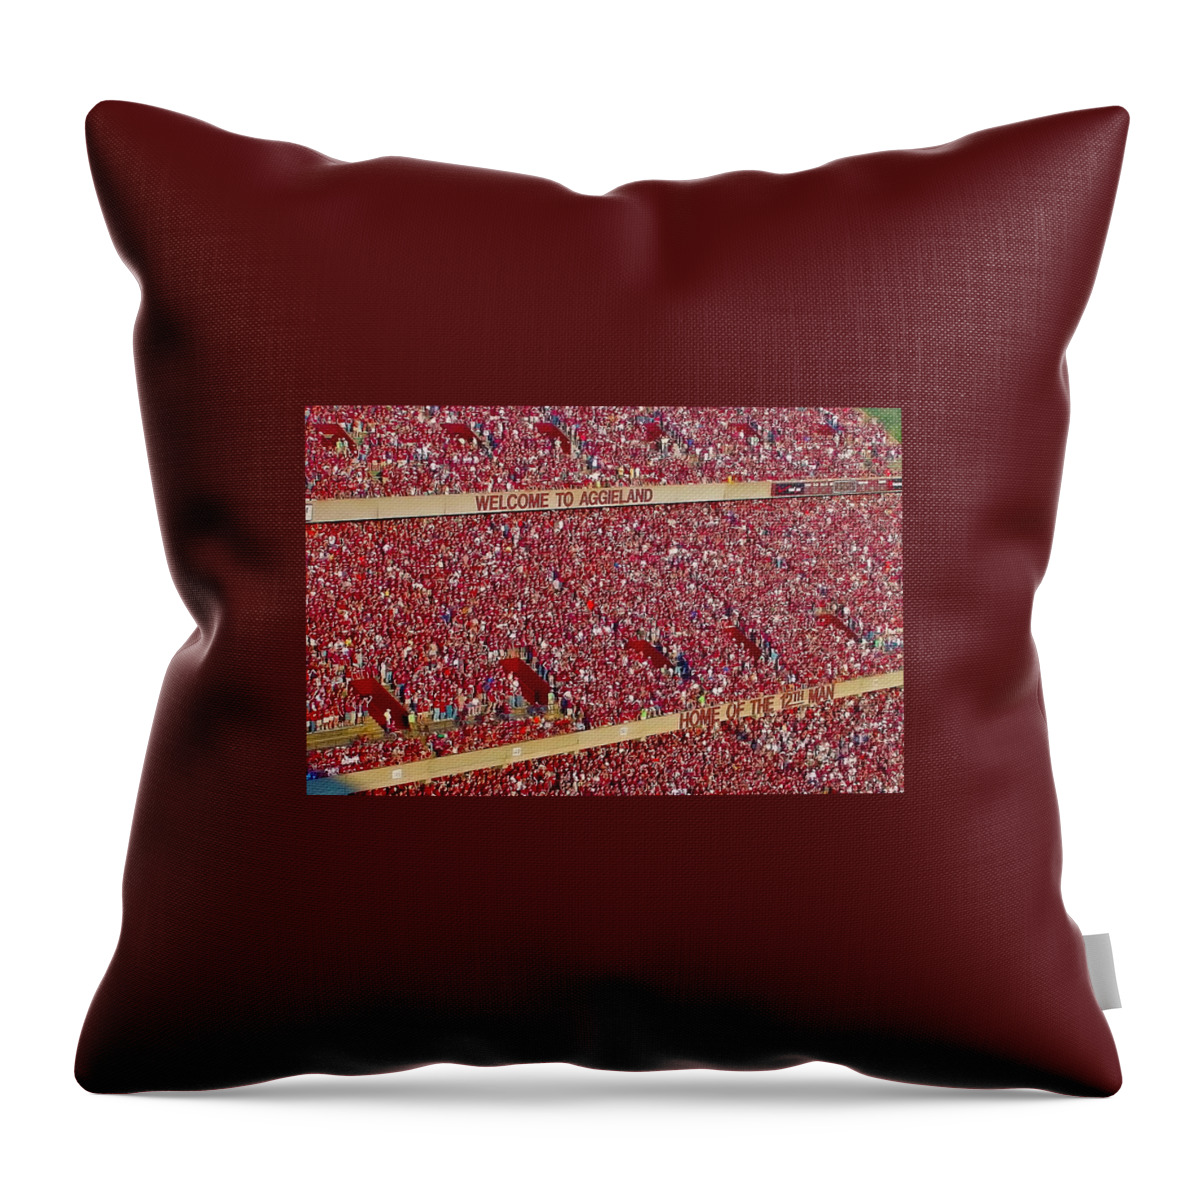 Texas A&m University Throw Pillow featuring the photograph The 12th Man by Gary Holmes